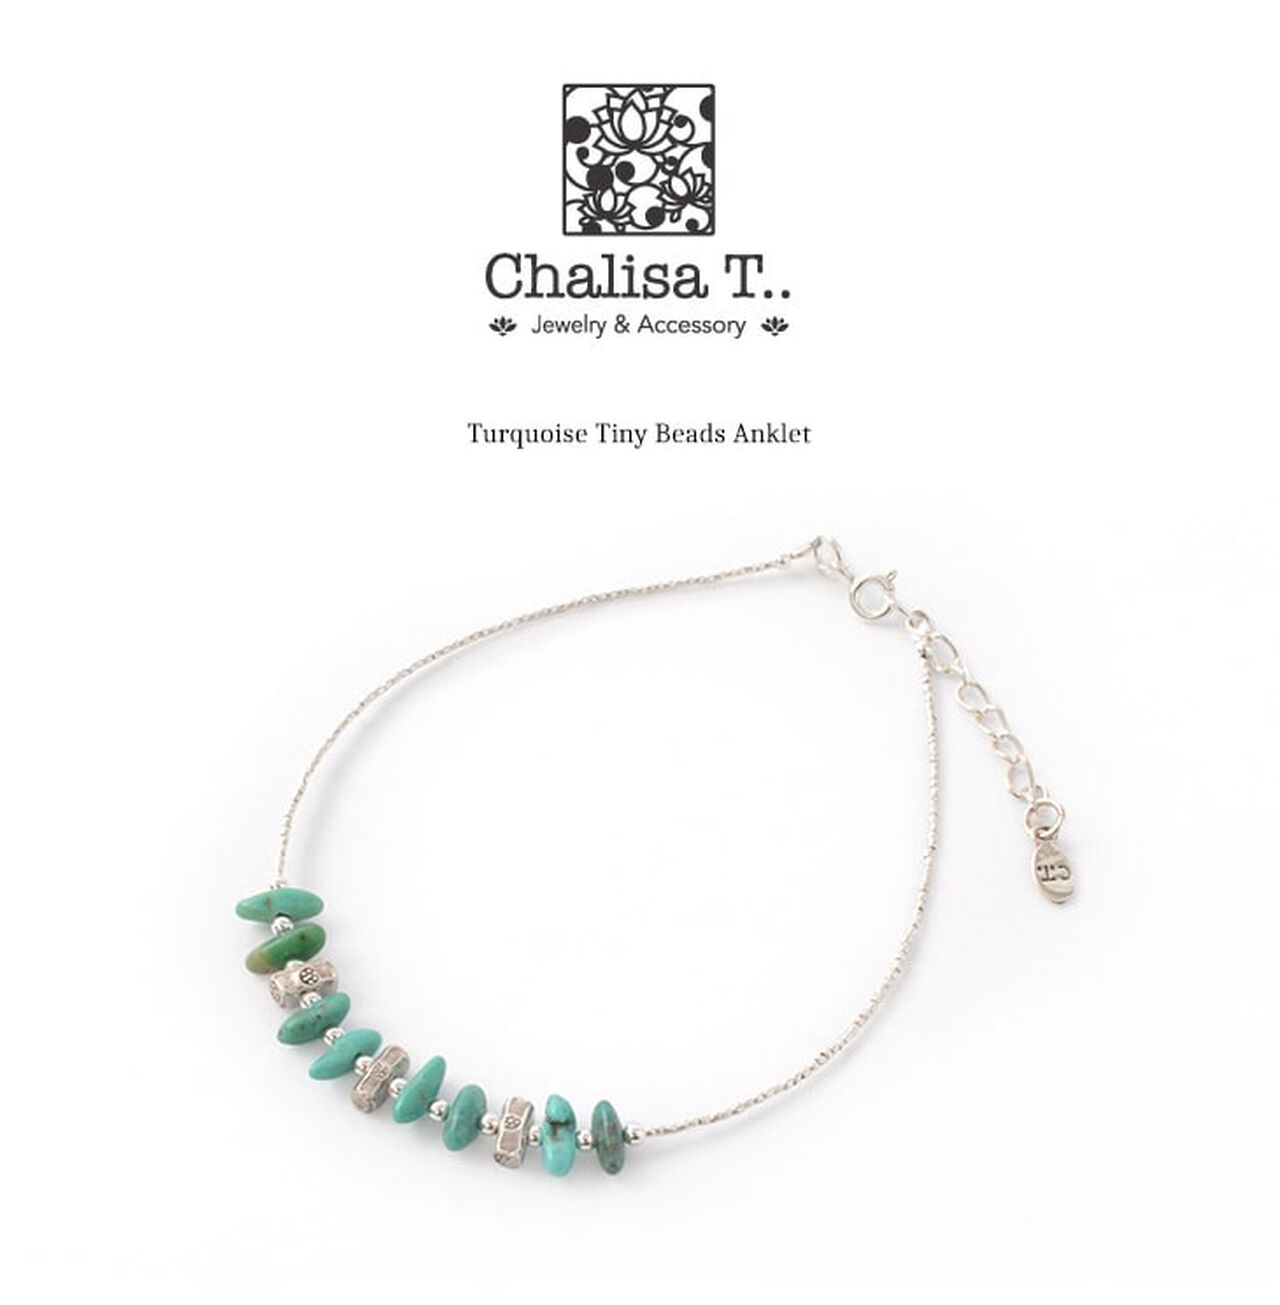 Turquoise Tiny Beads Anklet,, large image number 1